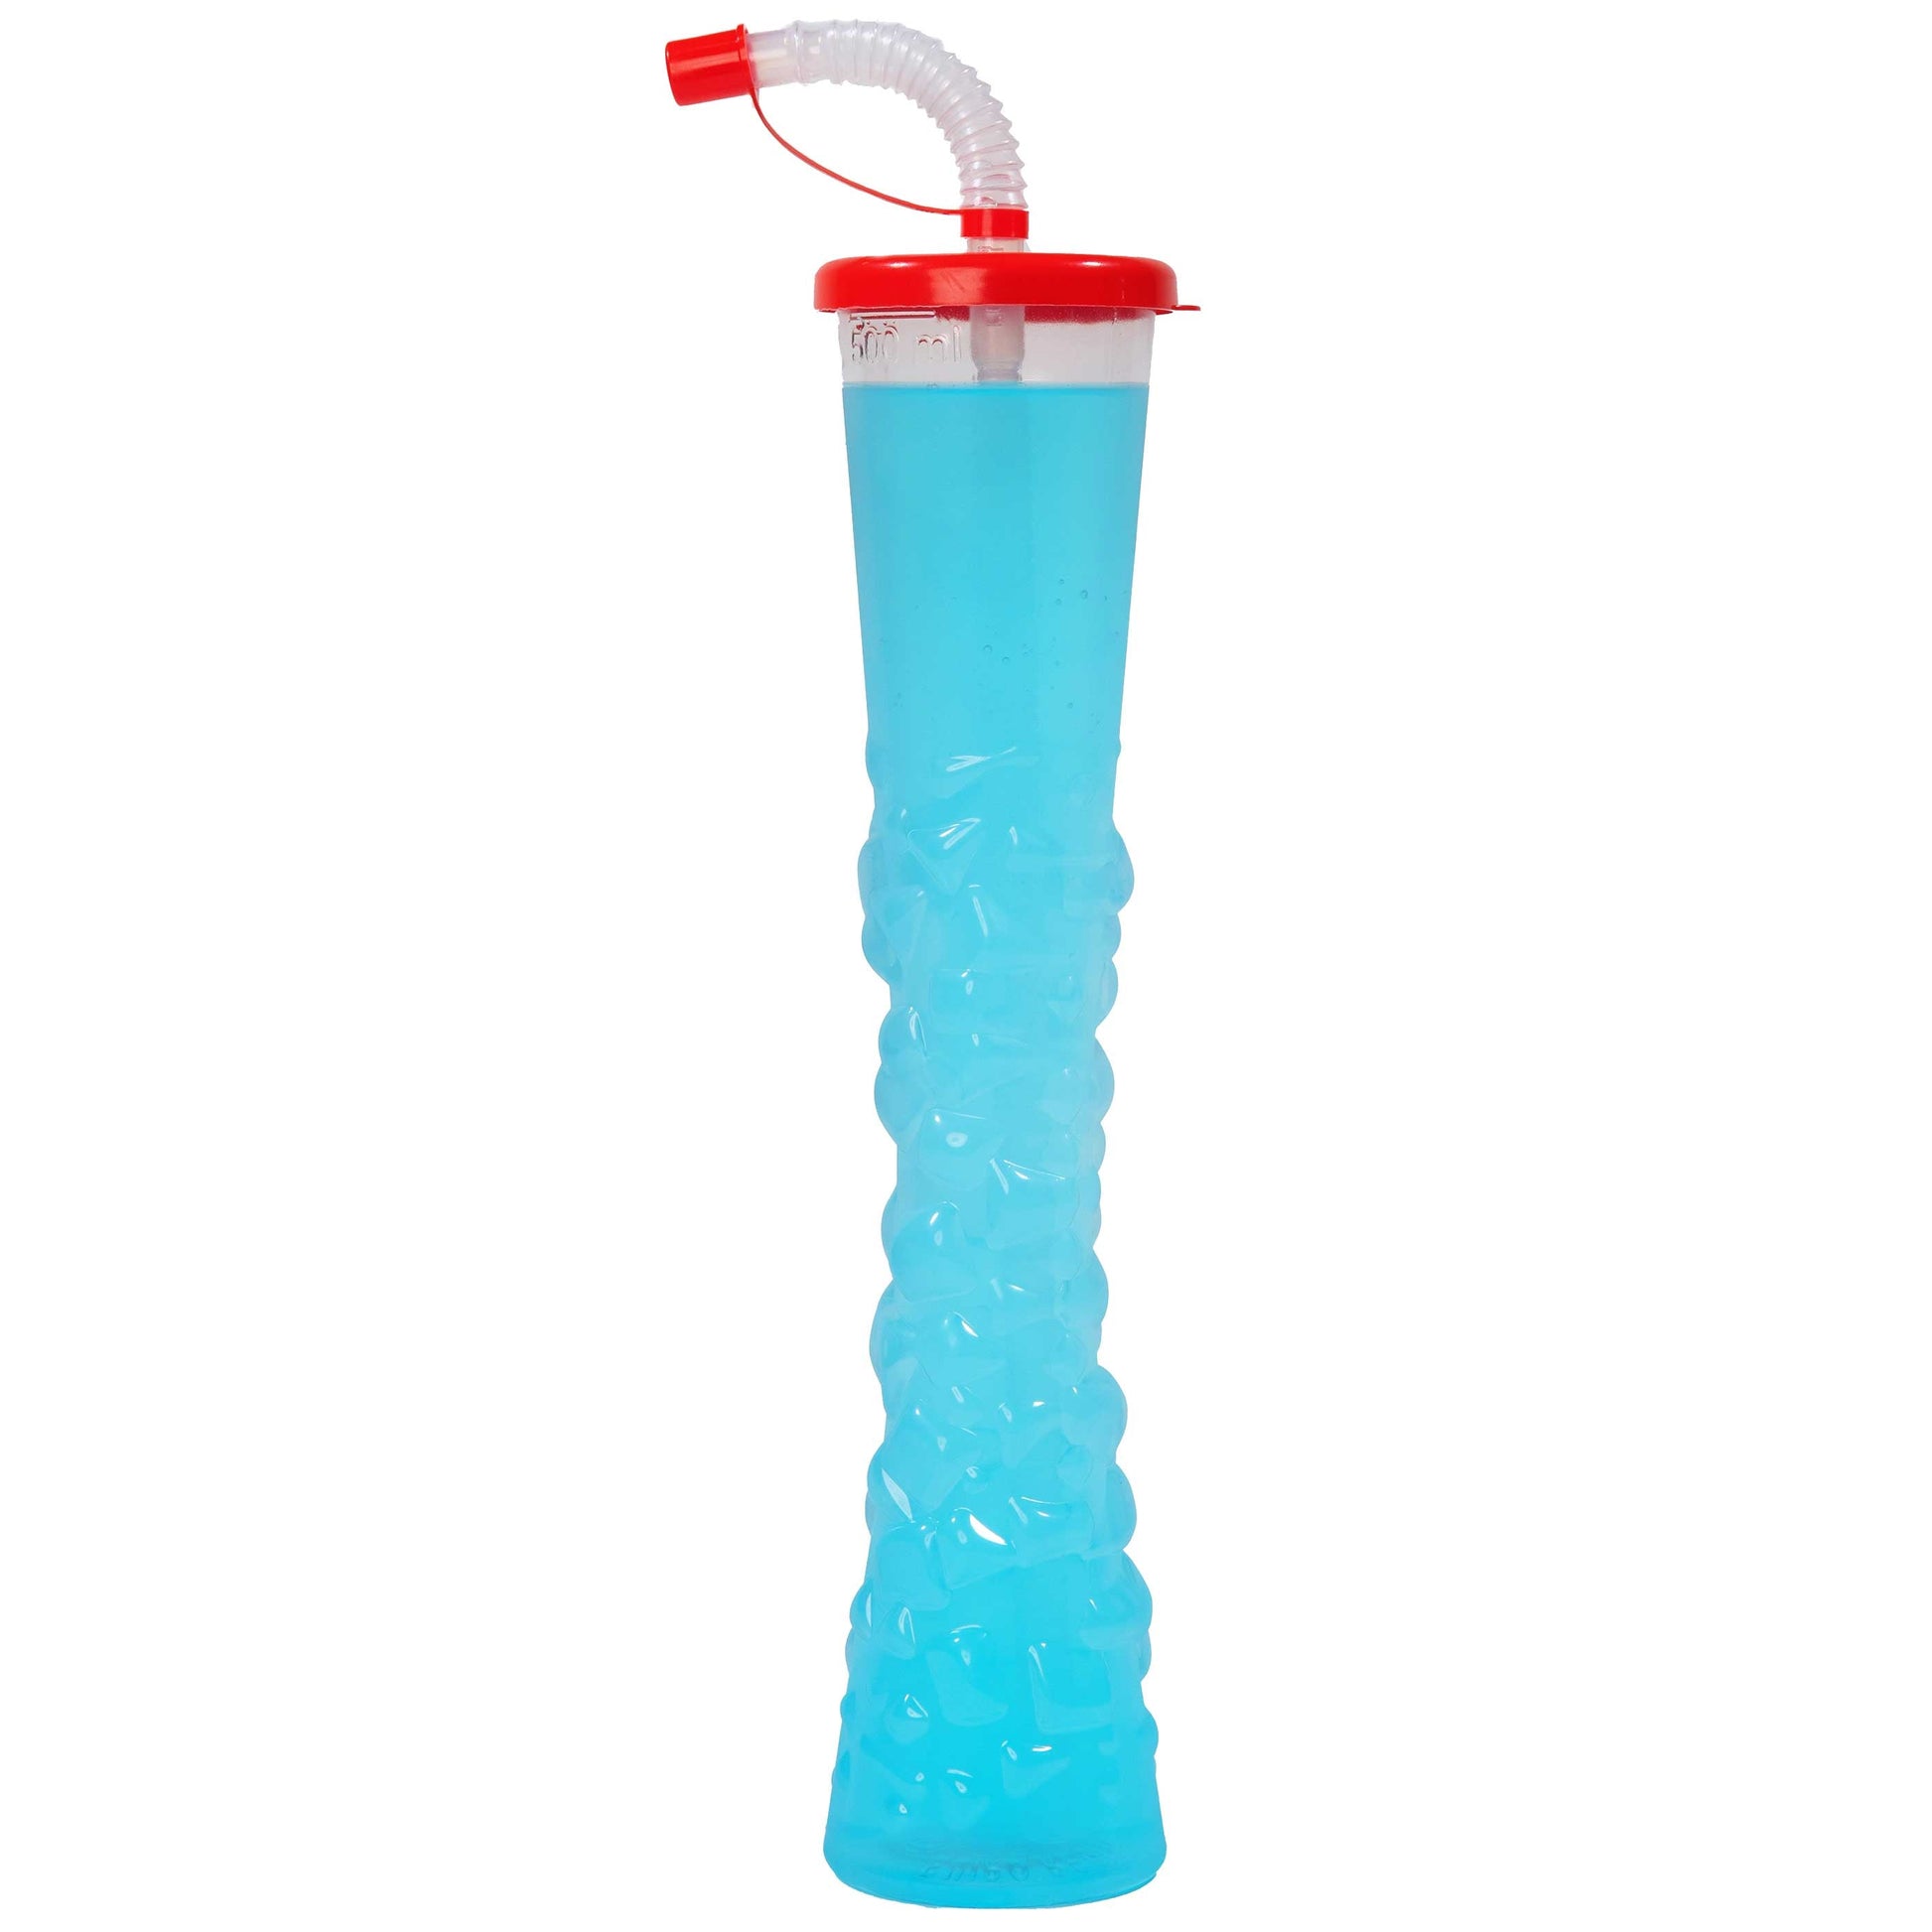 Sweet World USA Yard Cups Ice Yard Cups with LED Coasters (54 Cups - Red) - for Frozen Drinks, Kids Parties - 17oz. (500ml) cups with lids and straws